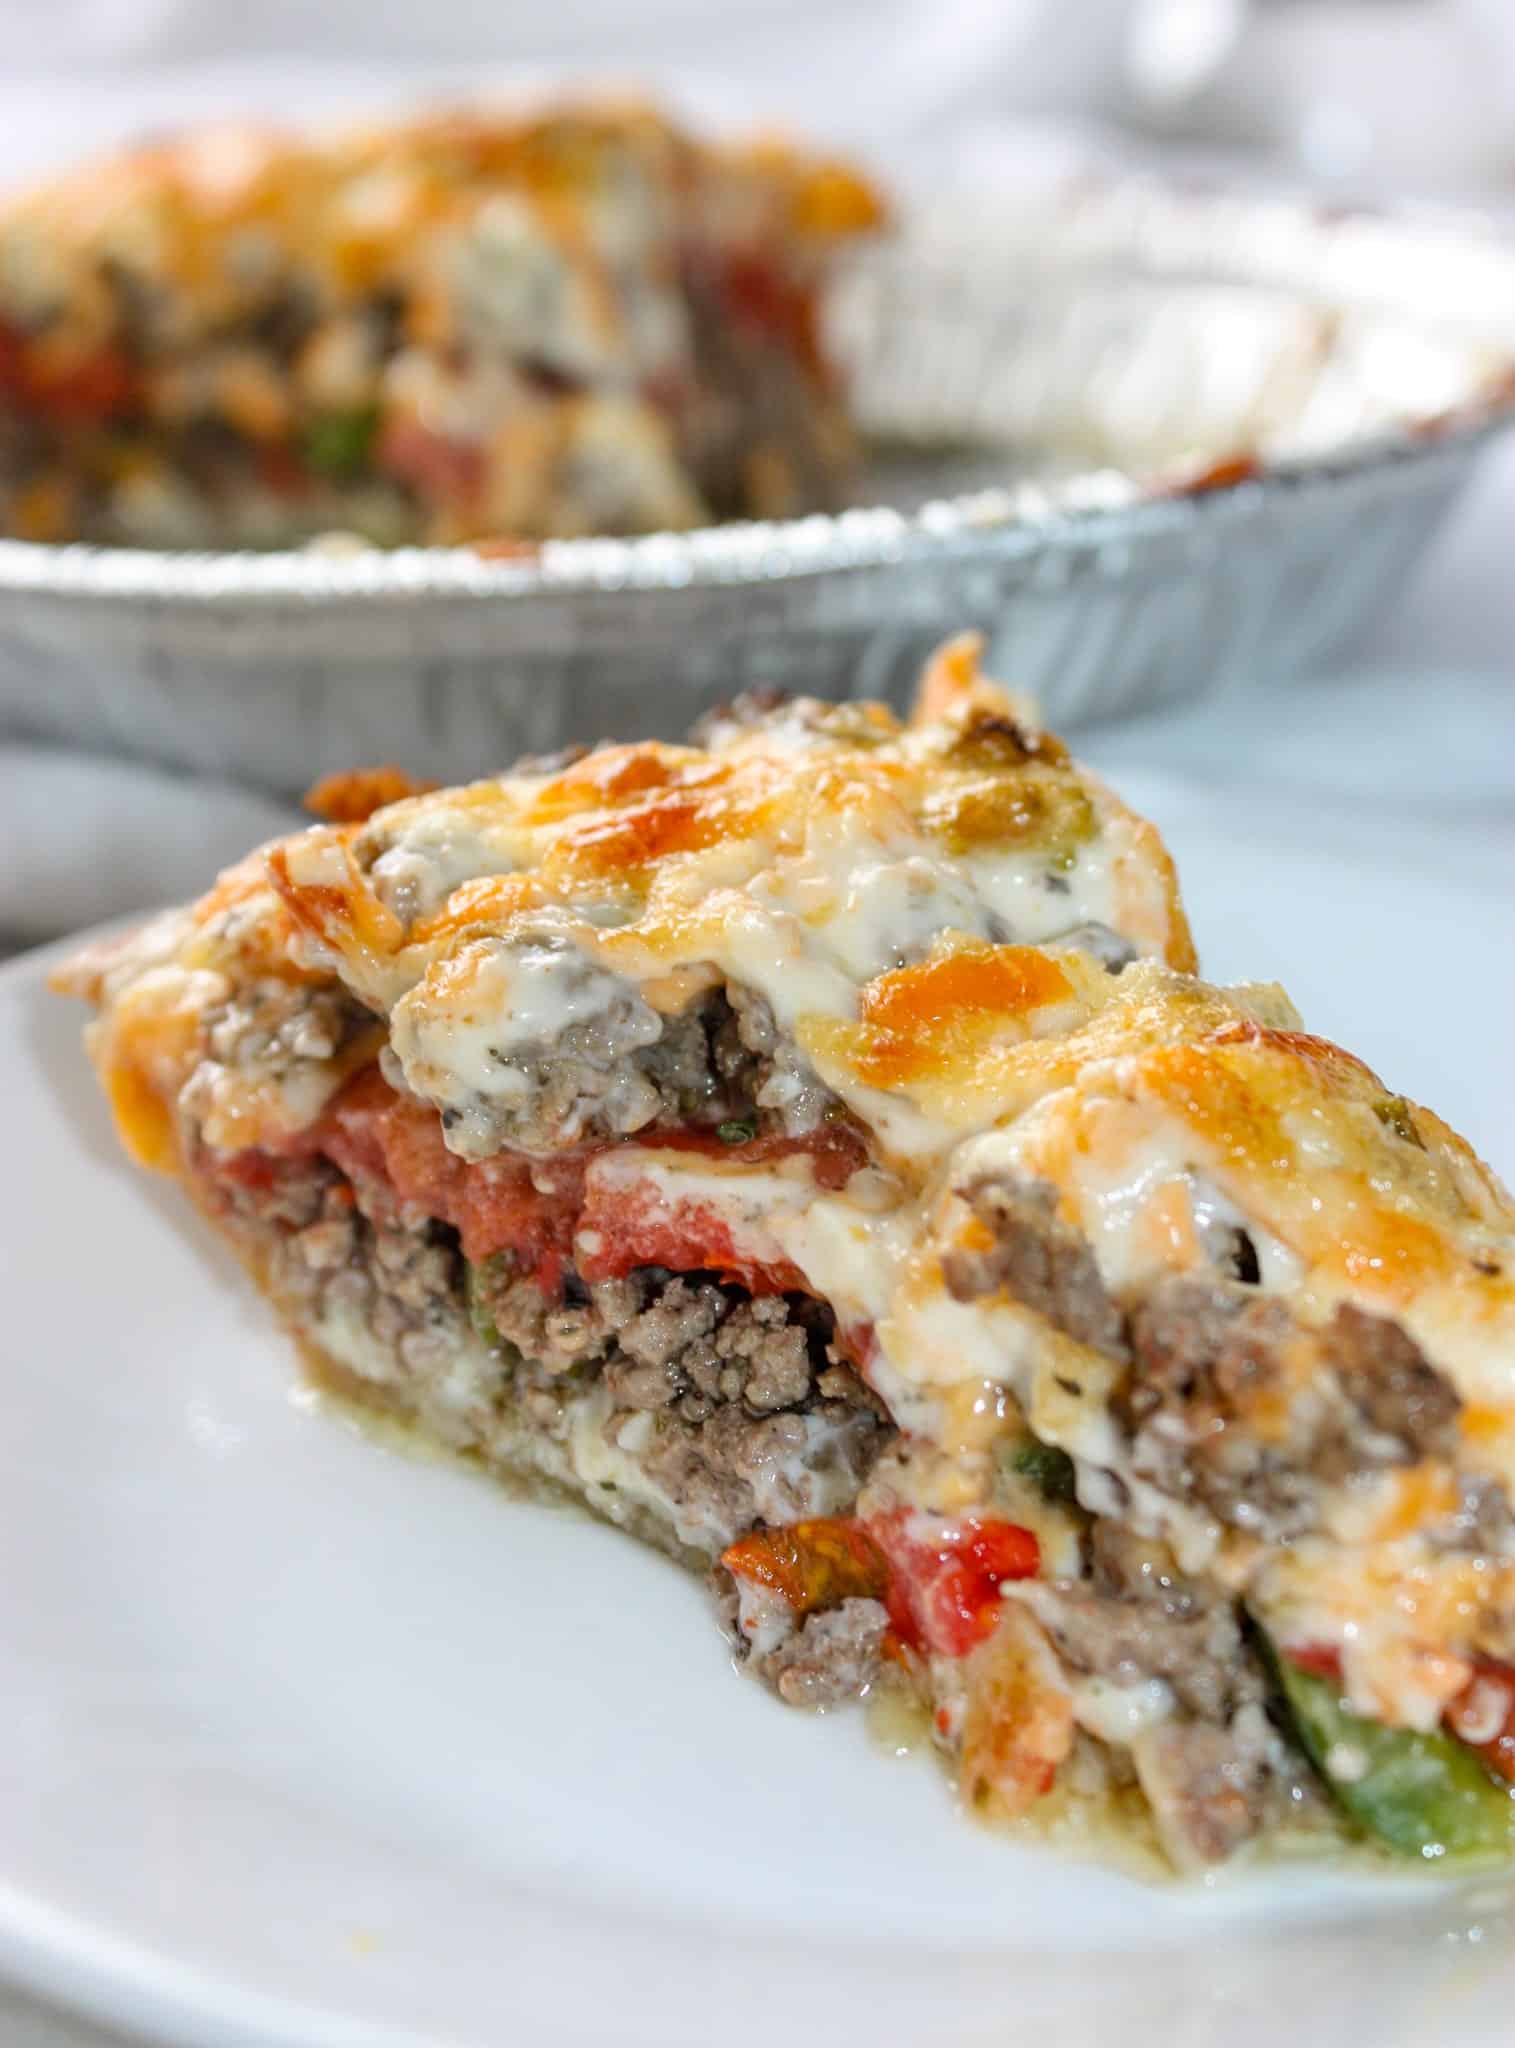 Beef and Tomato Pie is a delicious dinner recipe filled with ground beef, cheese, tomatoes and spices.